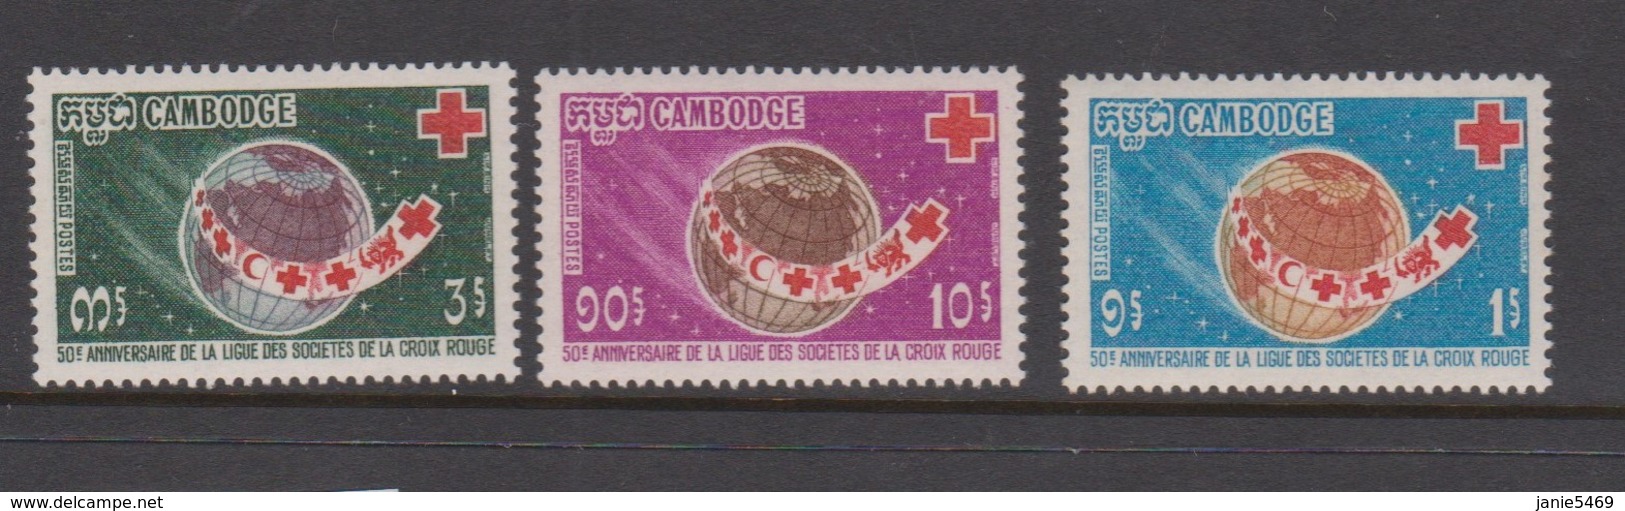 Cambodia SG 246-248 1969 50th Anniversary Red Cross Societies ,mint Never Hinged - Cambodge